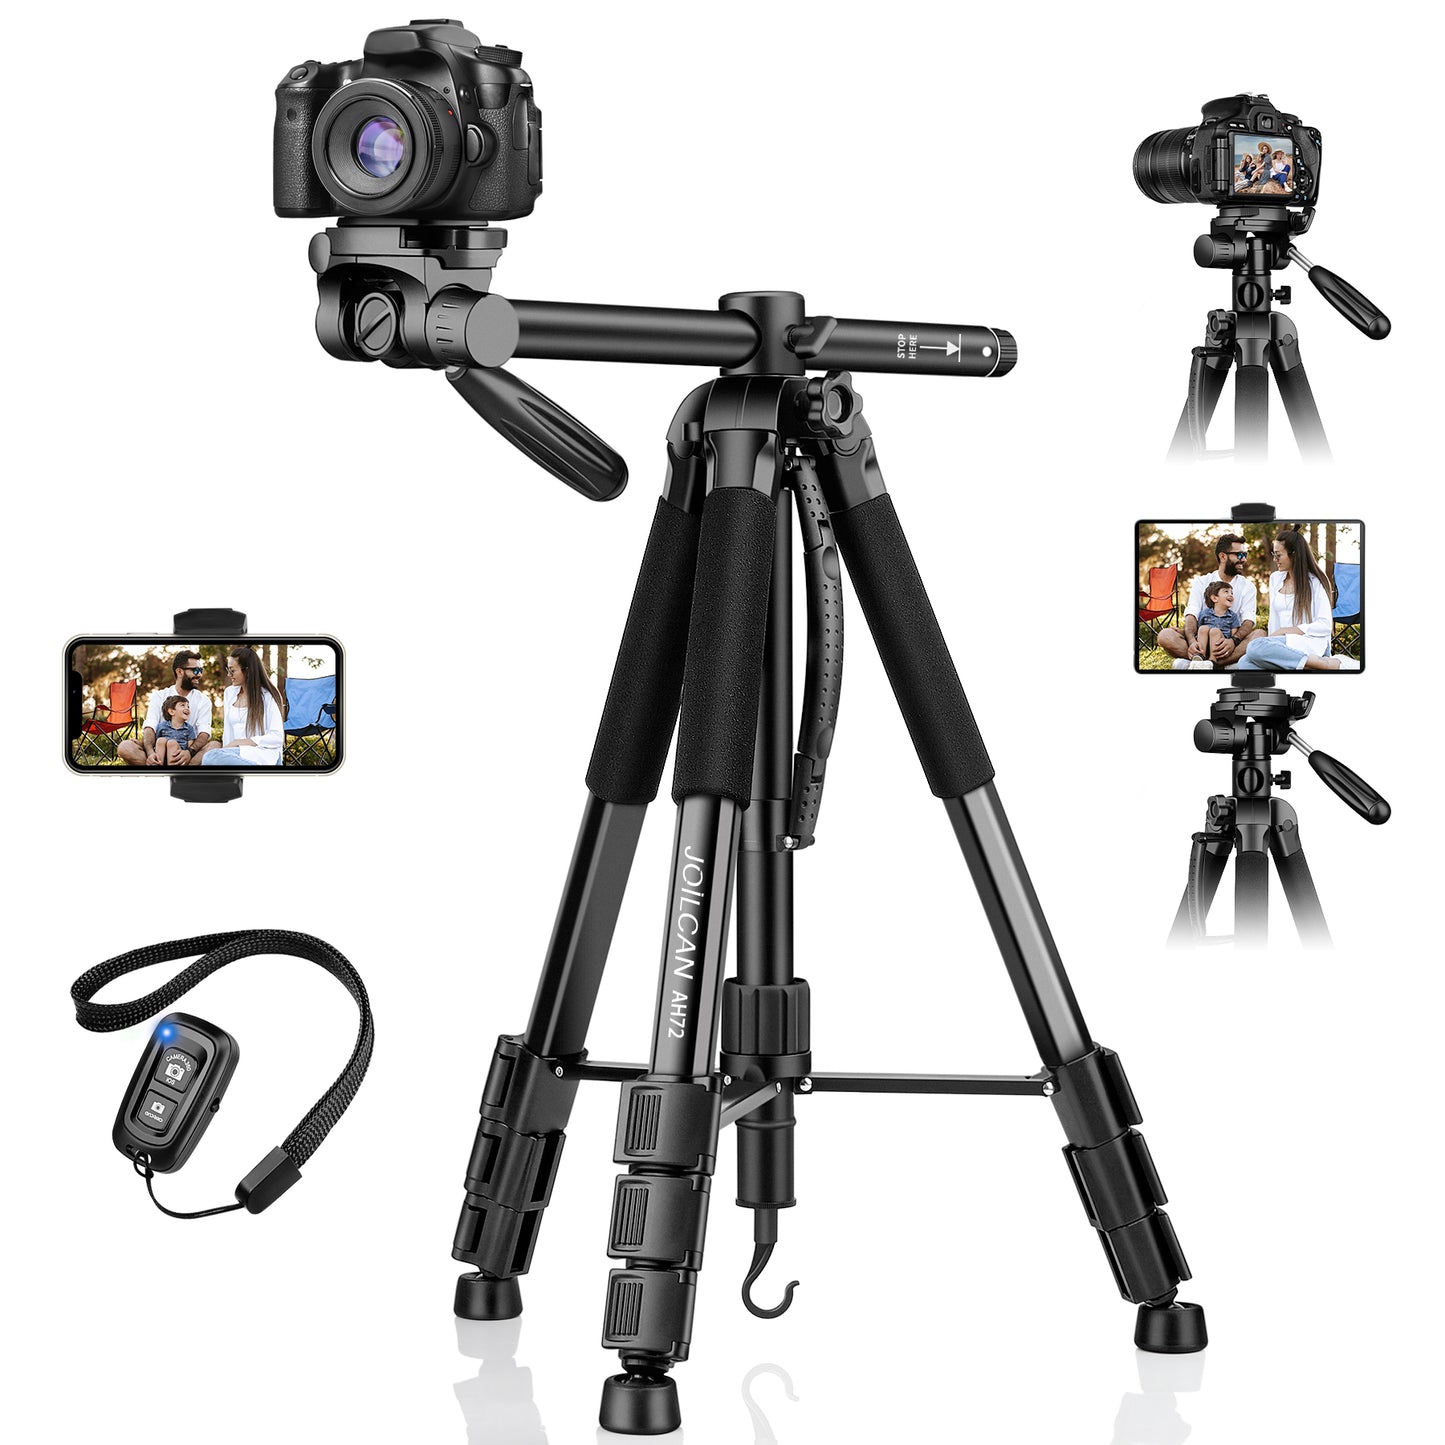 JOILCAN 71" Central Axis Horizontal Camera Tripod for Canon/Nikon/DSLR Cameras, Aluminum Monopod Tripod Camera Stand with 2-in-1 Tablet/Phone Holder for iPad/iOS/Android Smartphones, Max Load 15LB(EU)